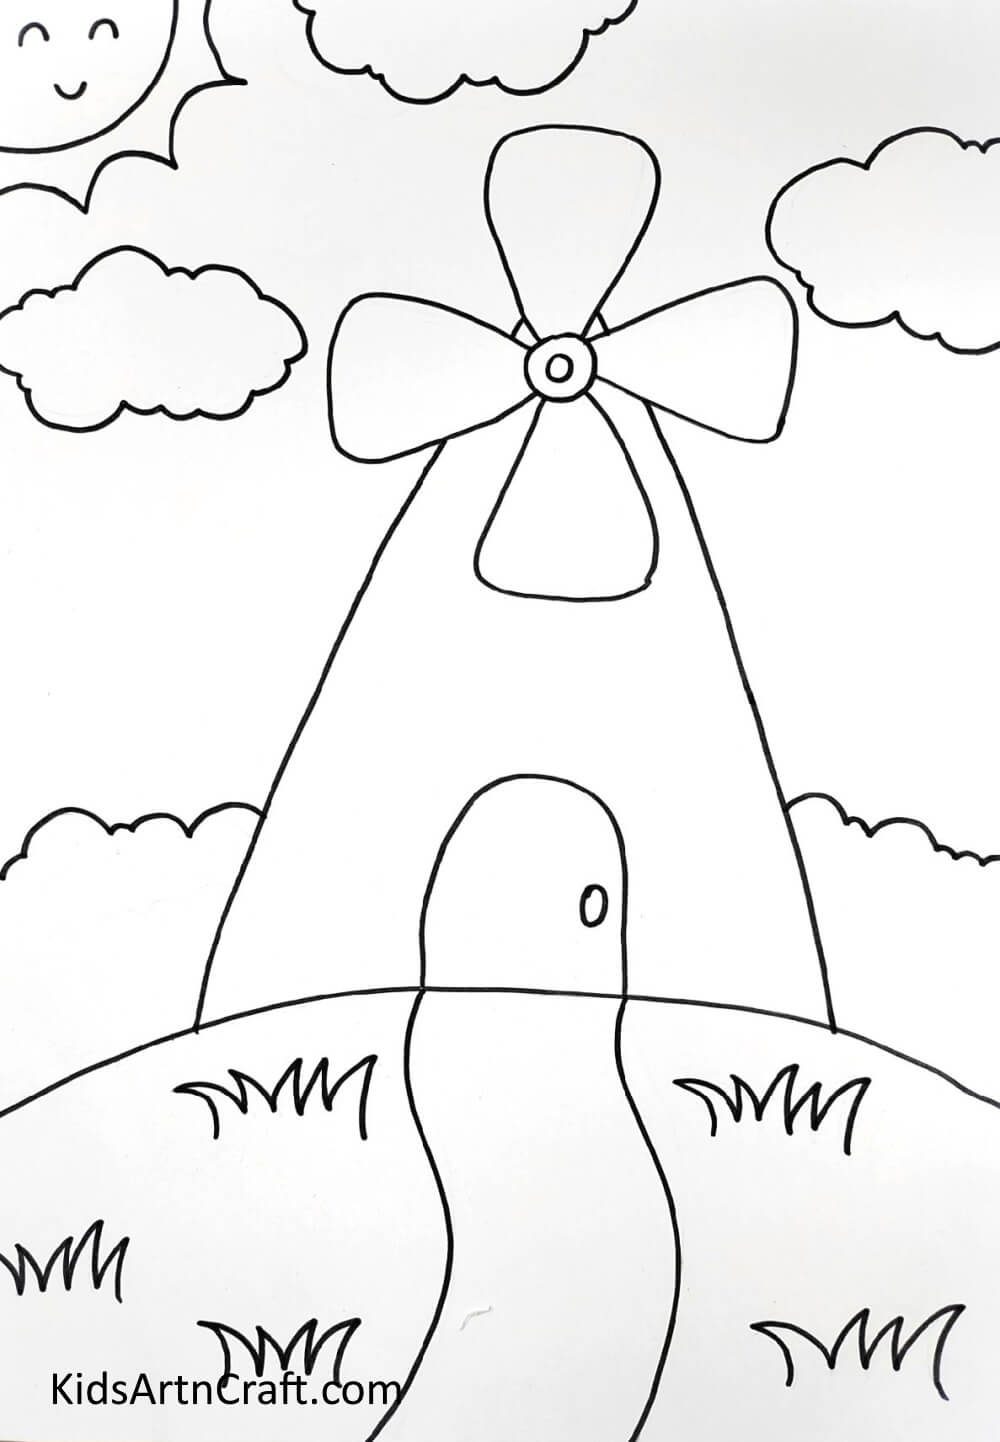 Drawing Sun and Clouds - Teaching Kids to Draw and Color a Windmill